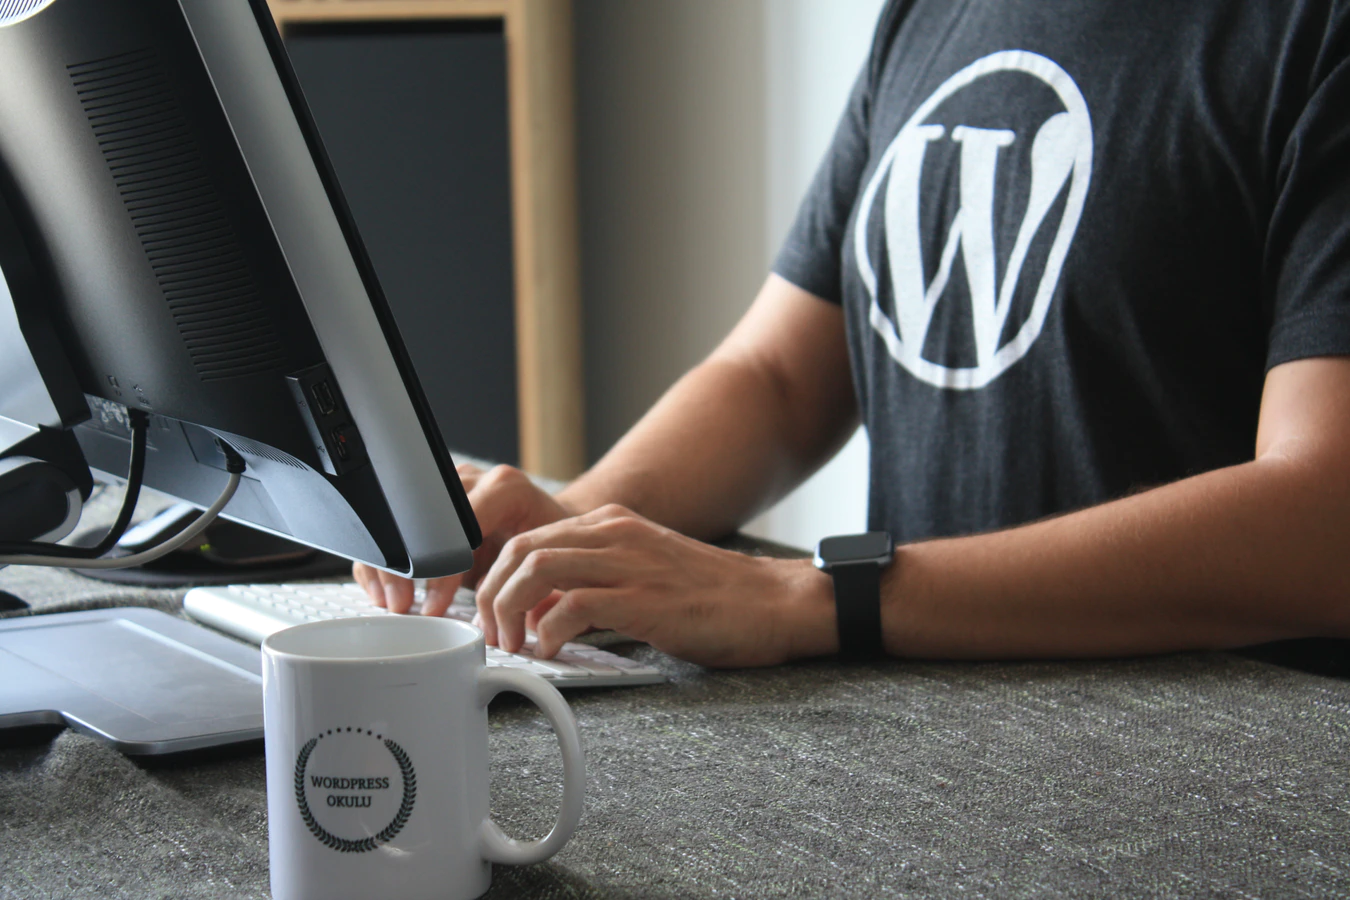 How to launch a WordPress Website in 10 steps